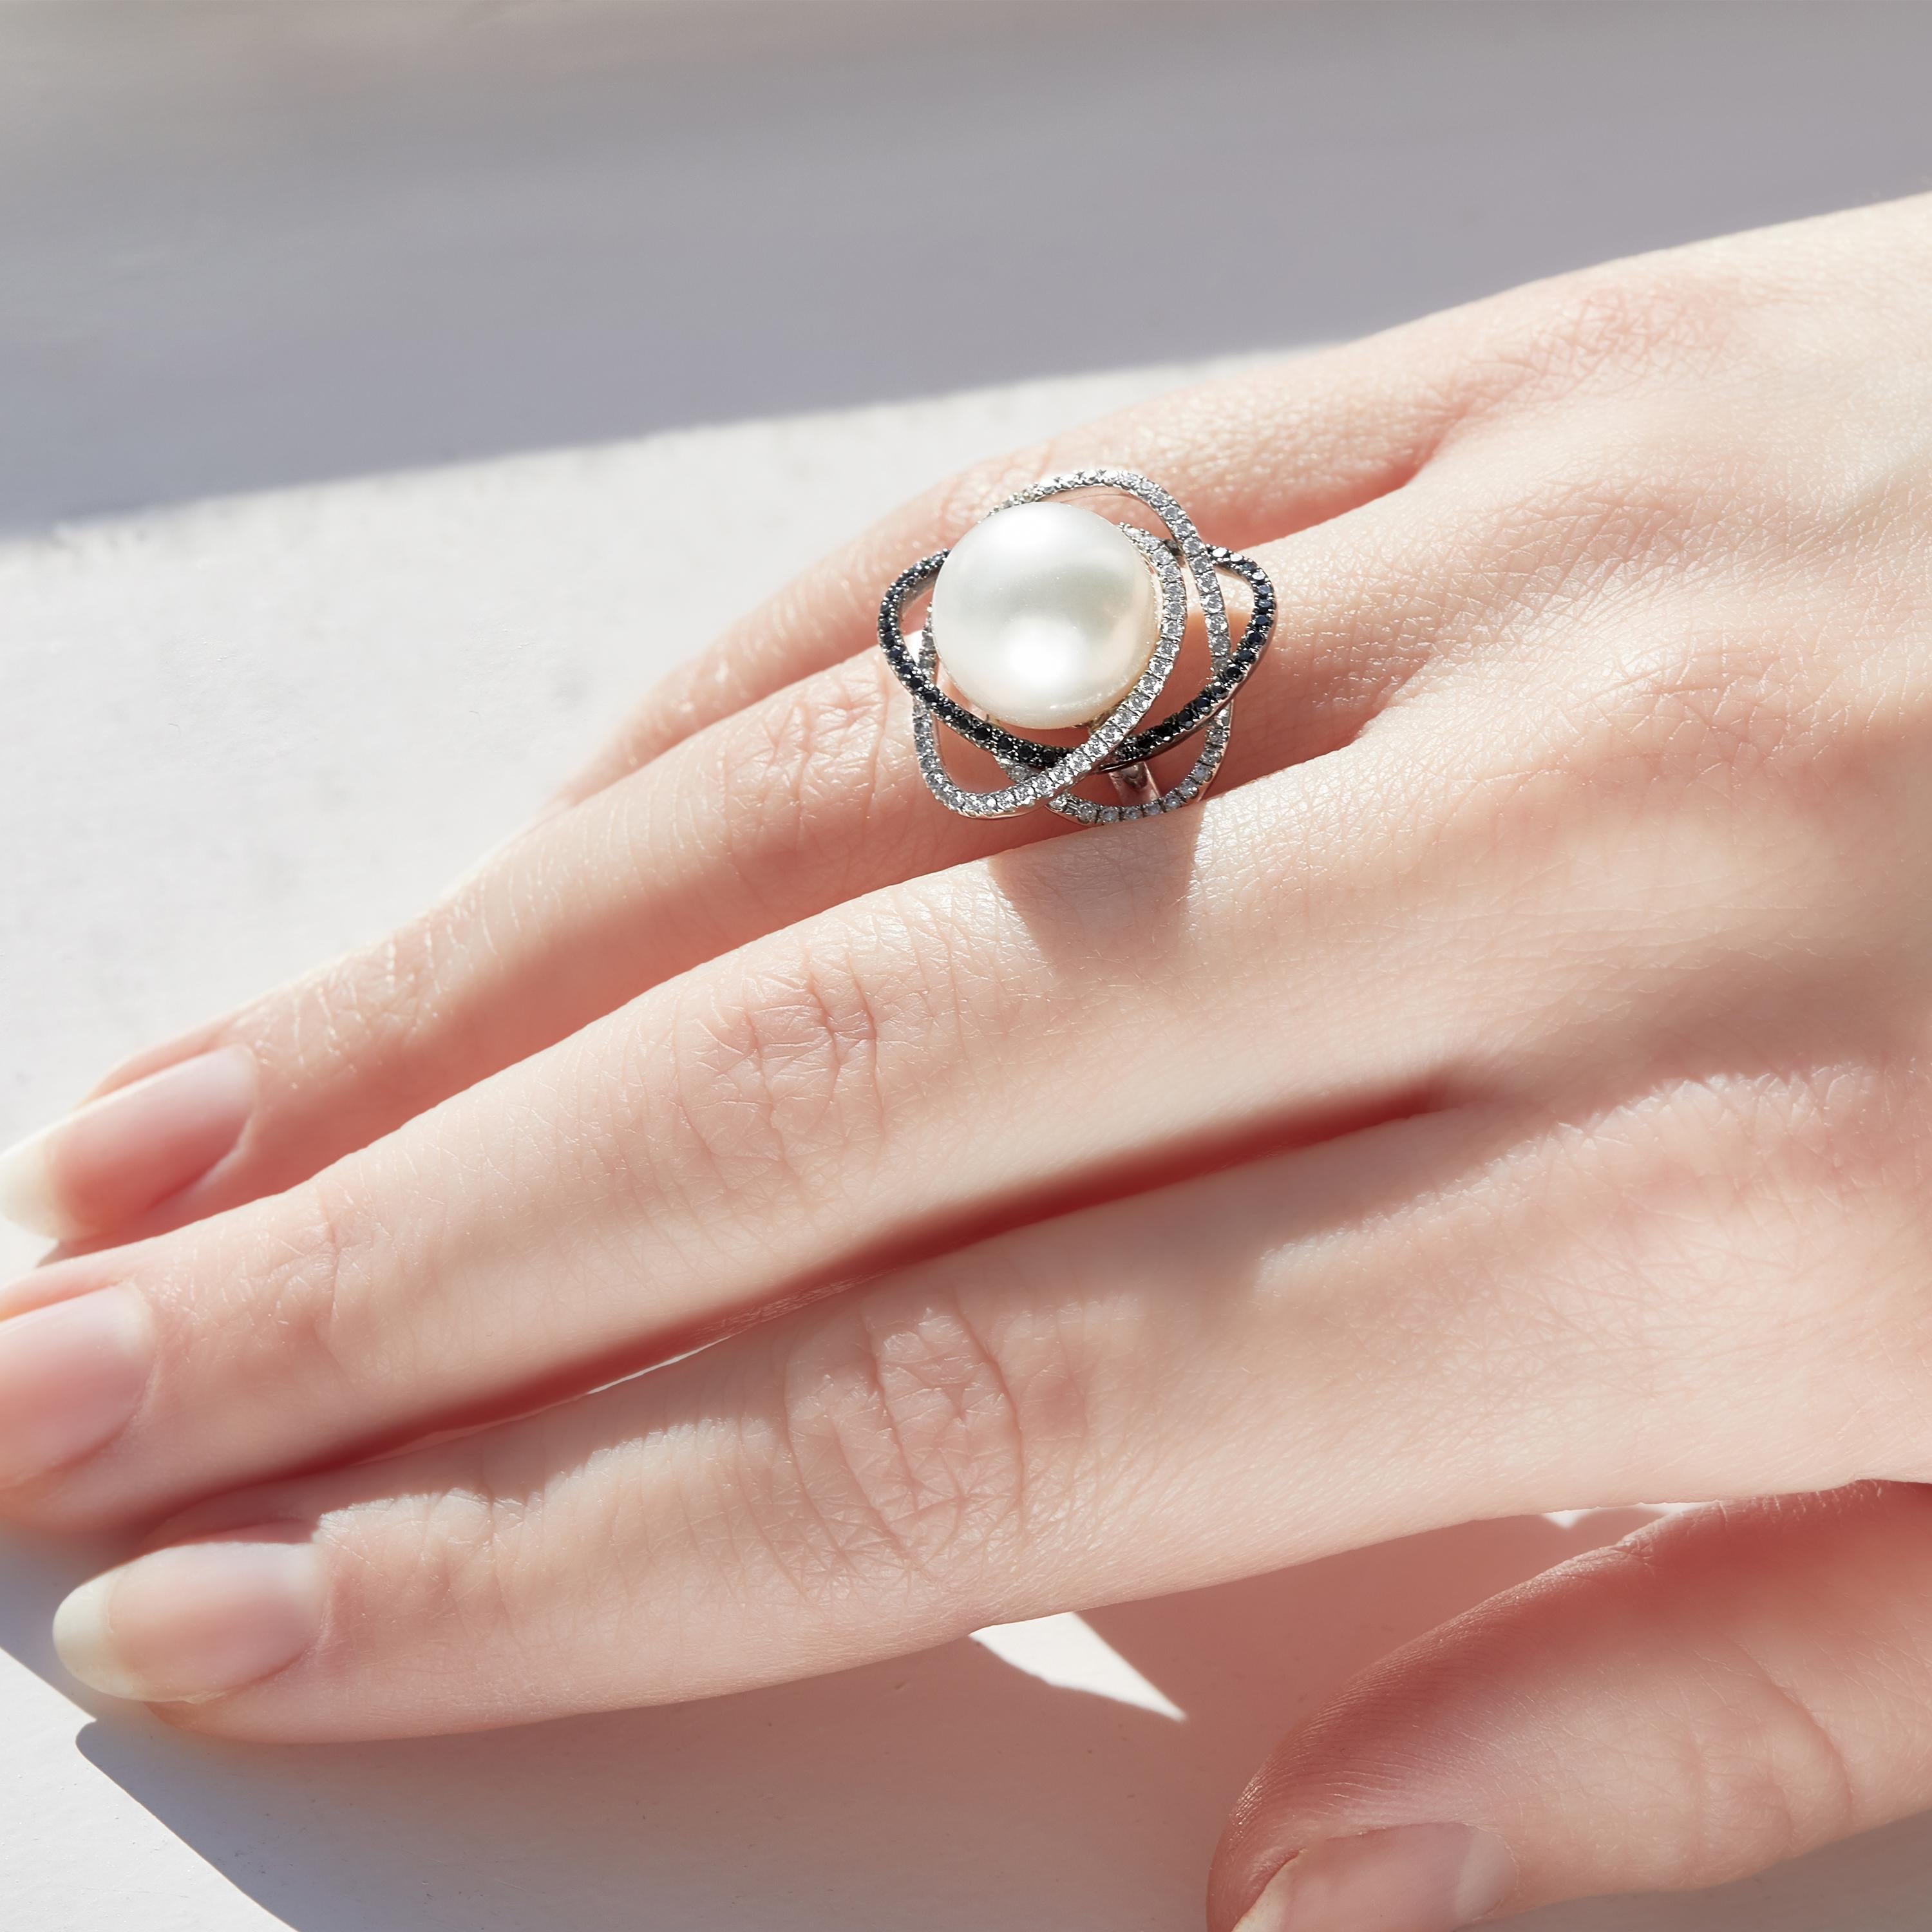 This exceptional ring by Yoko London features a lustrous South Sea pearl surrounded by delicate orbits of black and white diamonds. Expertly crafted in 18 Karat white gold in our London atelier, this striking ring adds a unique twist to the most